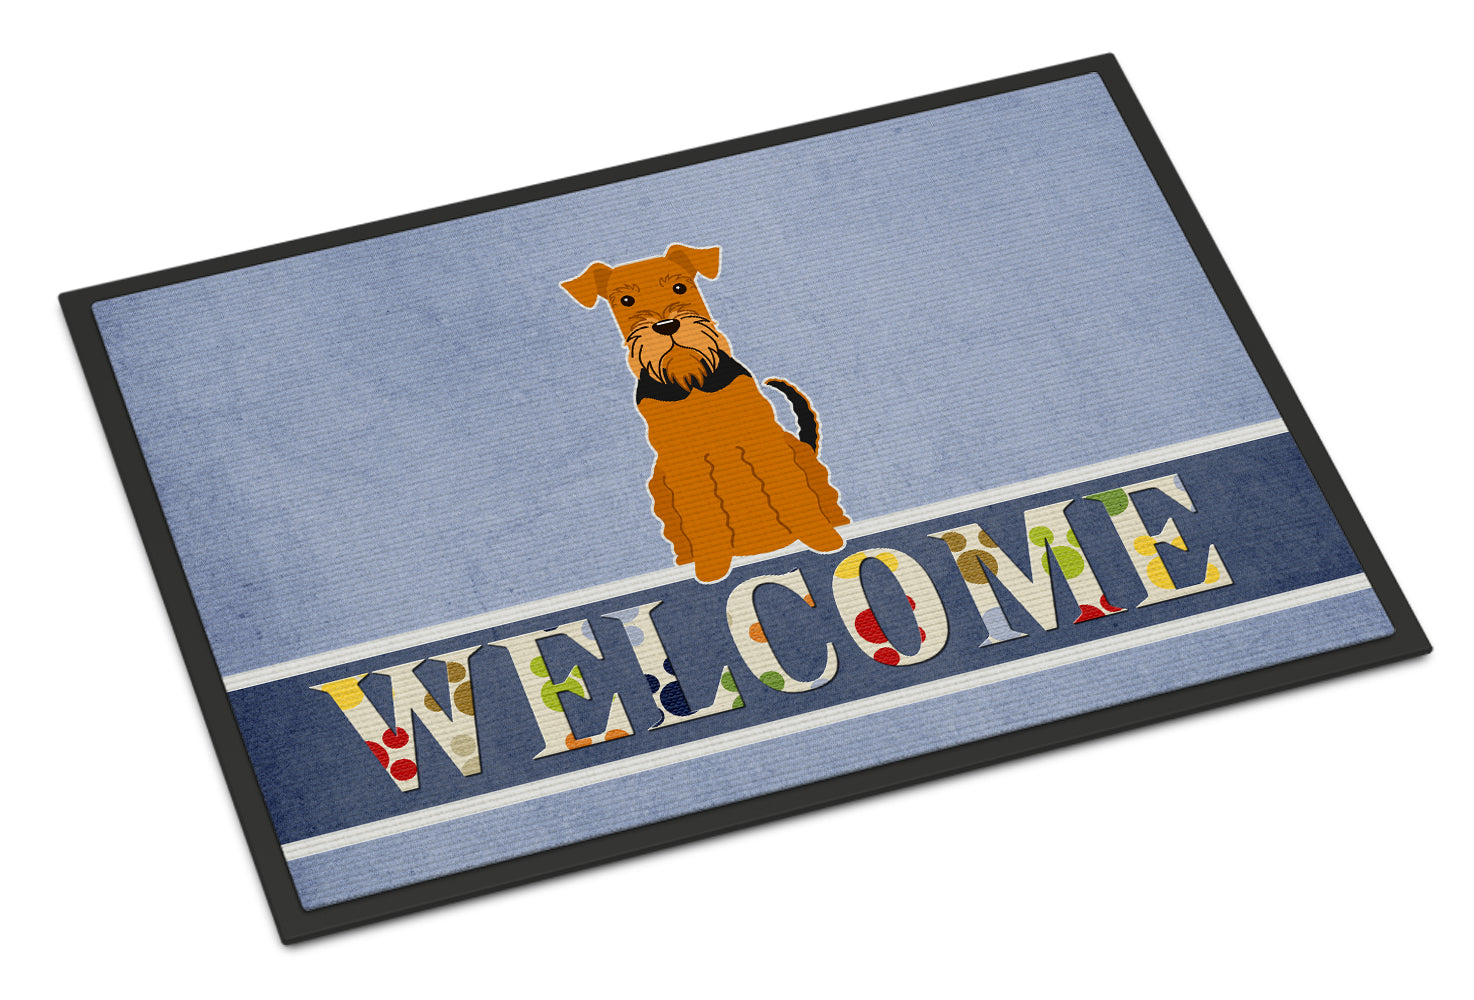 Airedale Welcome Indoor or Outdoor Mat 18x27 BB5622MAT - the-store.com